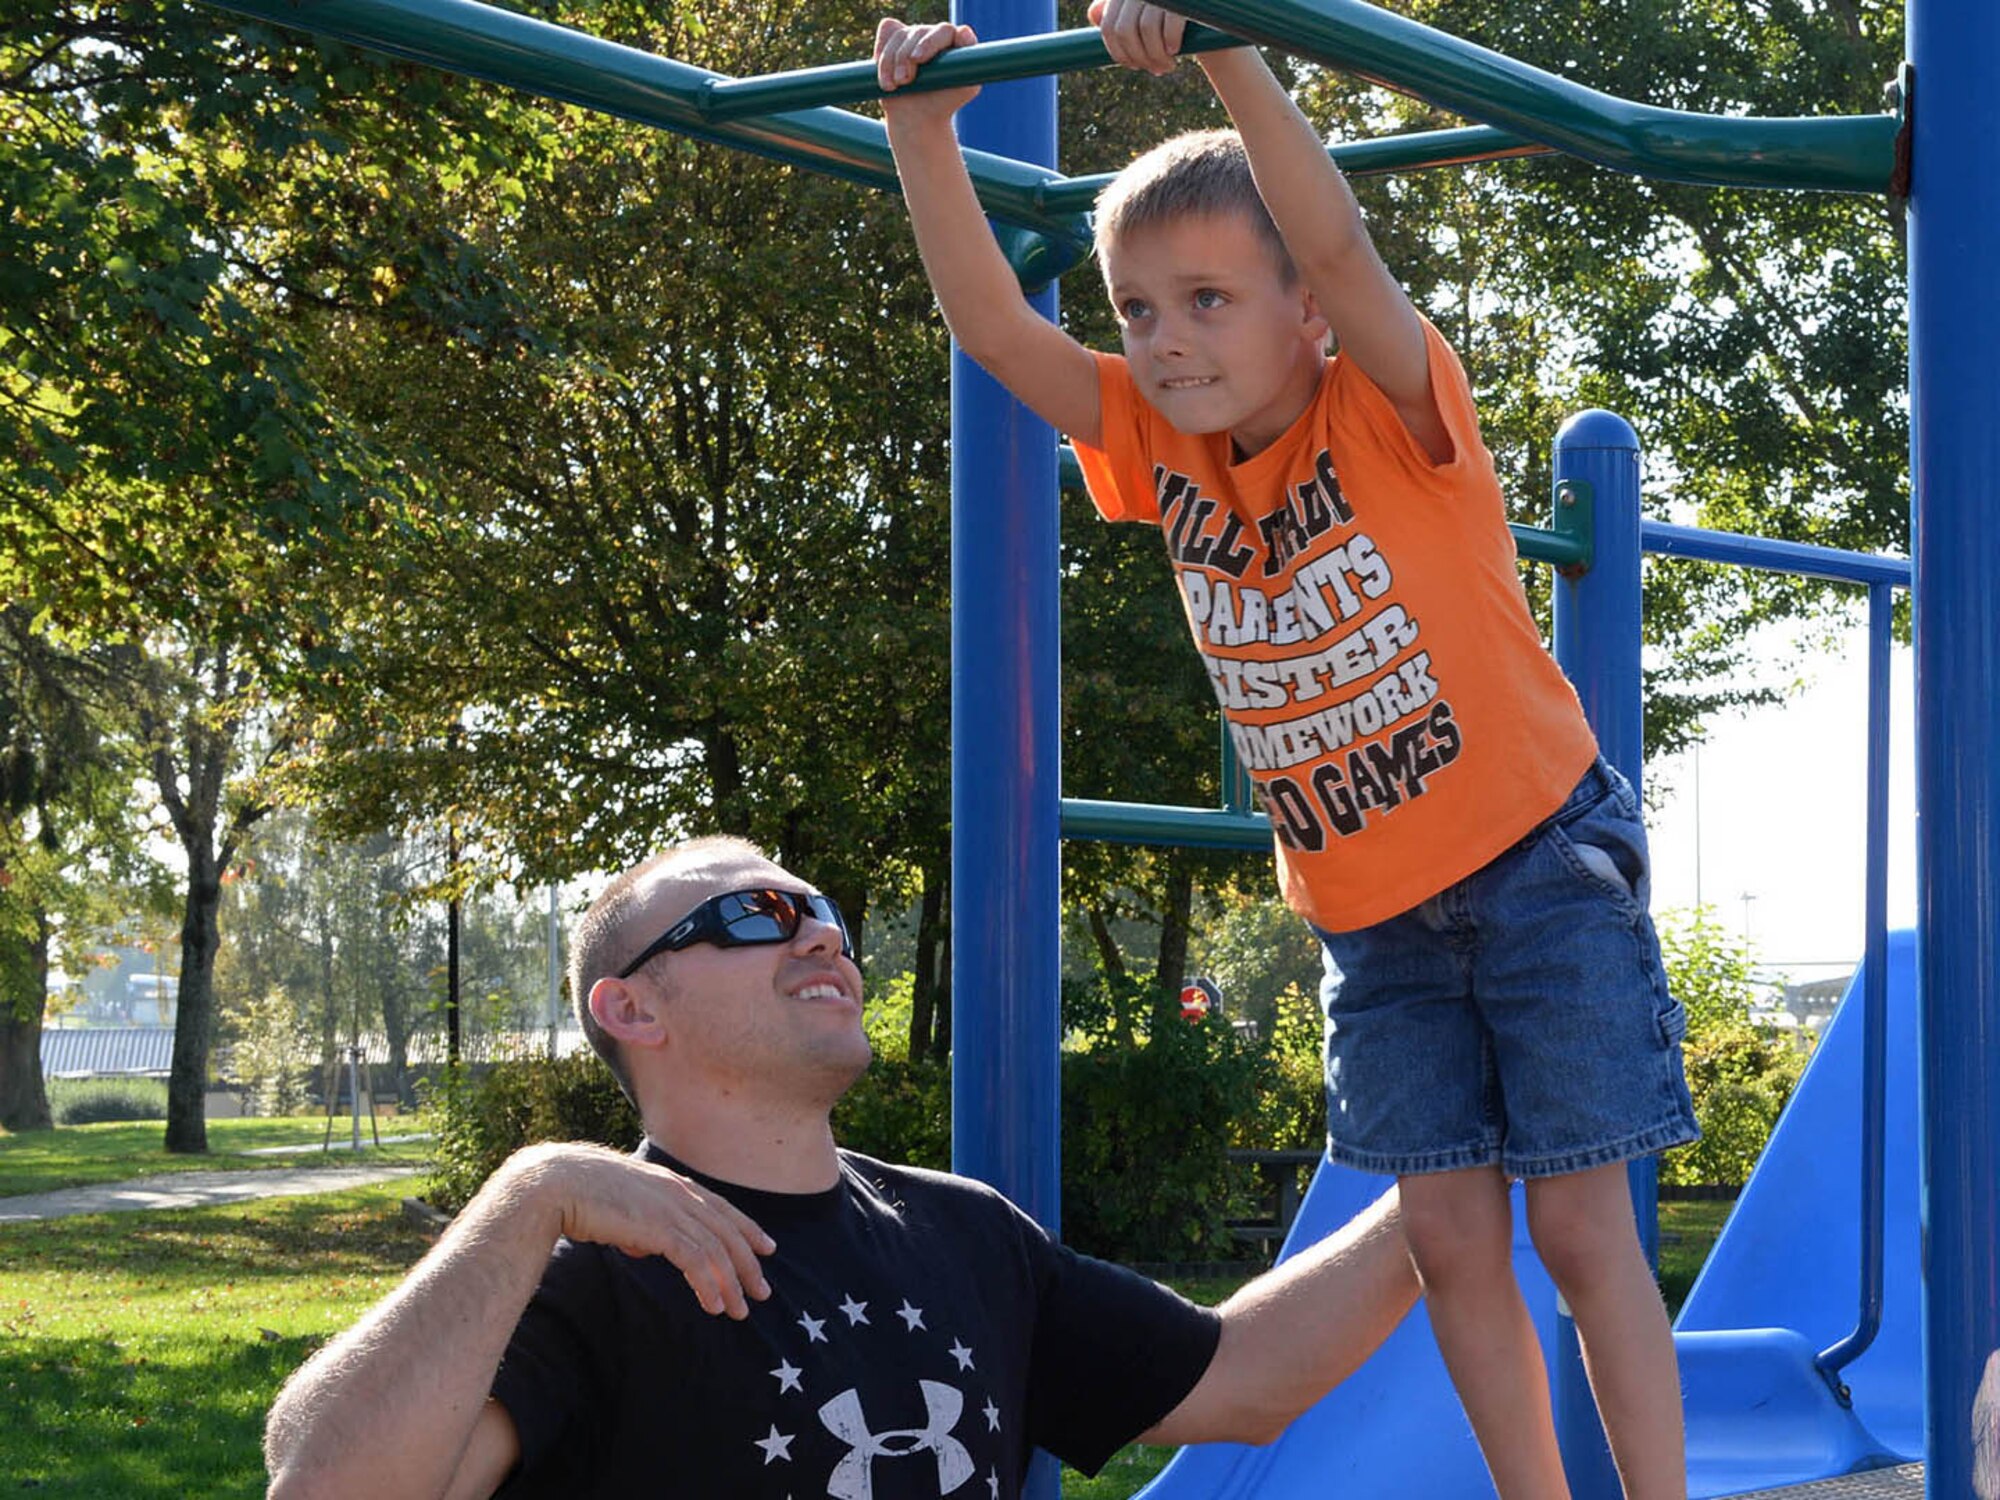 U.S. Air Force Airman 1st Class Ryan Macri, a 606th Air Control Squadron radio frequency transmission journeyman, spends time with his son Zachary Oct. 4, 2014, at a playground, at Spangdahlem Air Base, Germany.  The family spent several days together leading up to Ryan’s deployment. (U.S. Air Force photo by Airman 1st Class Dylan Nuckolls/Released)